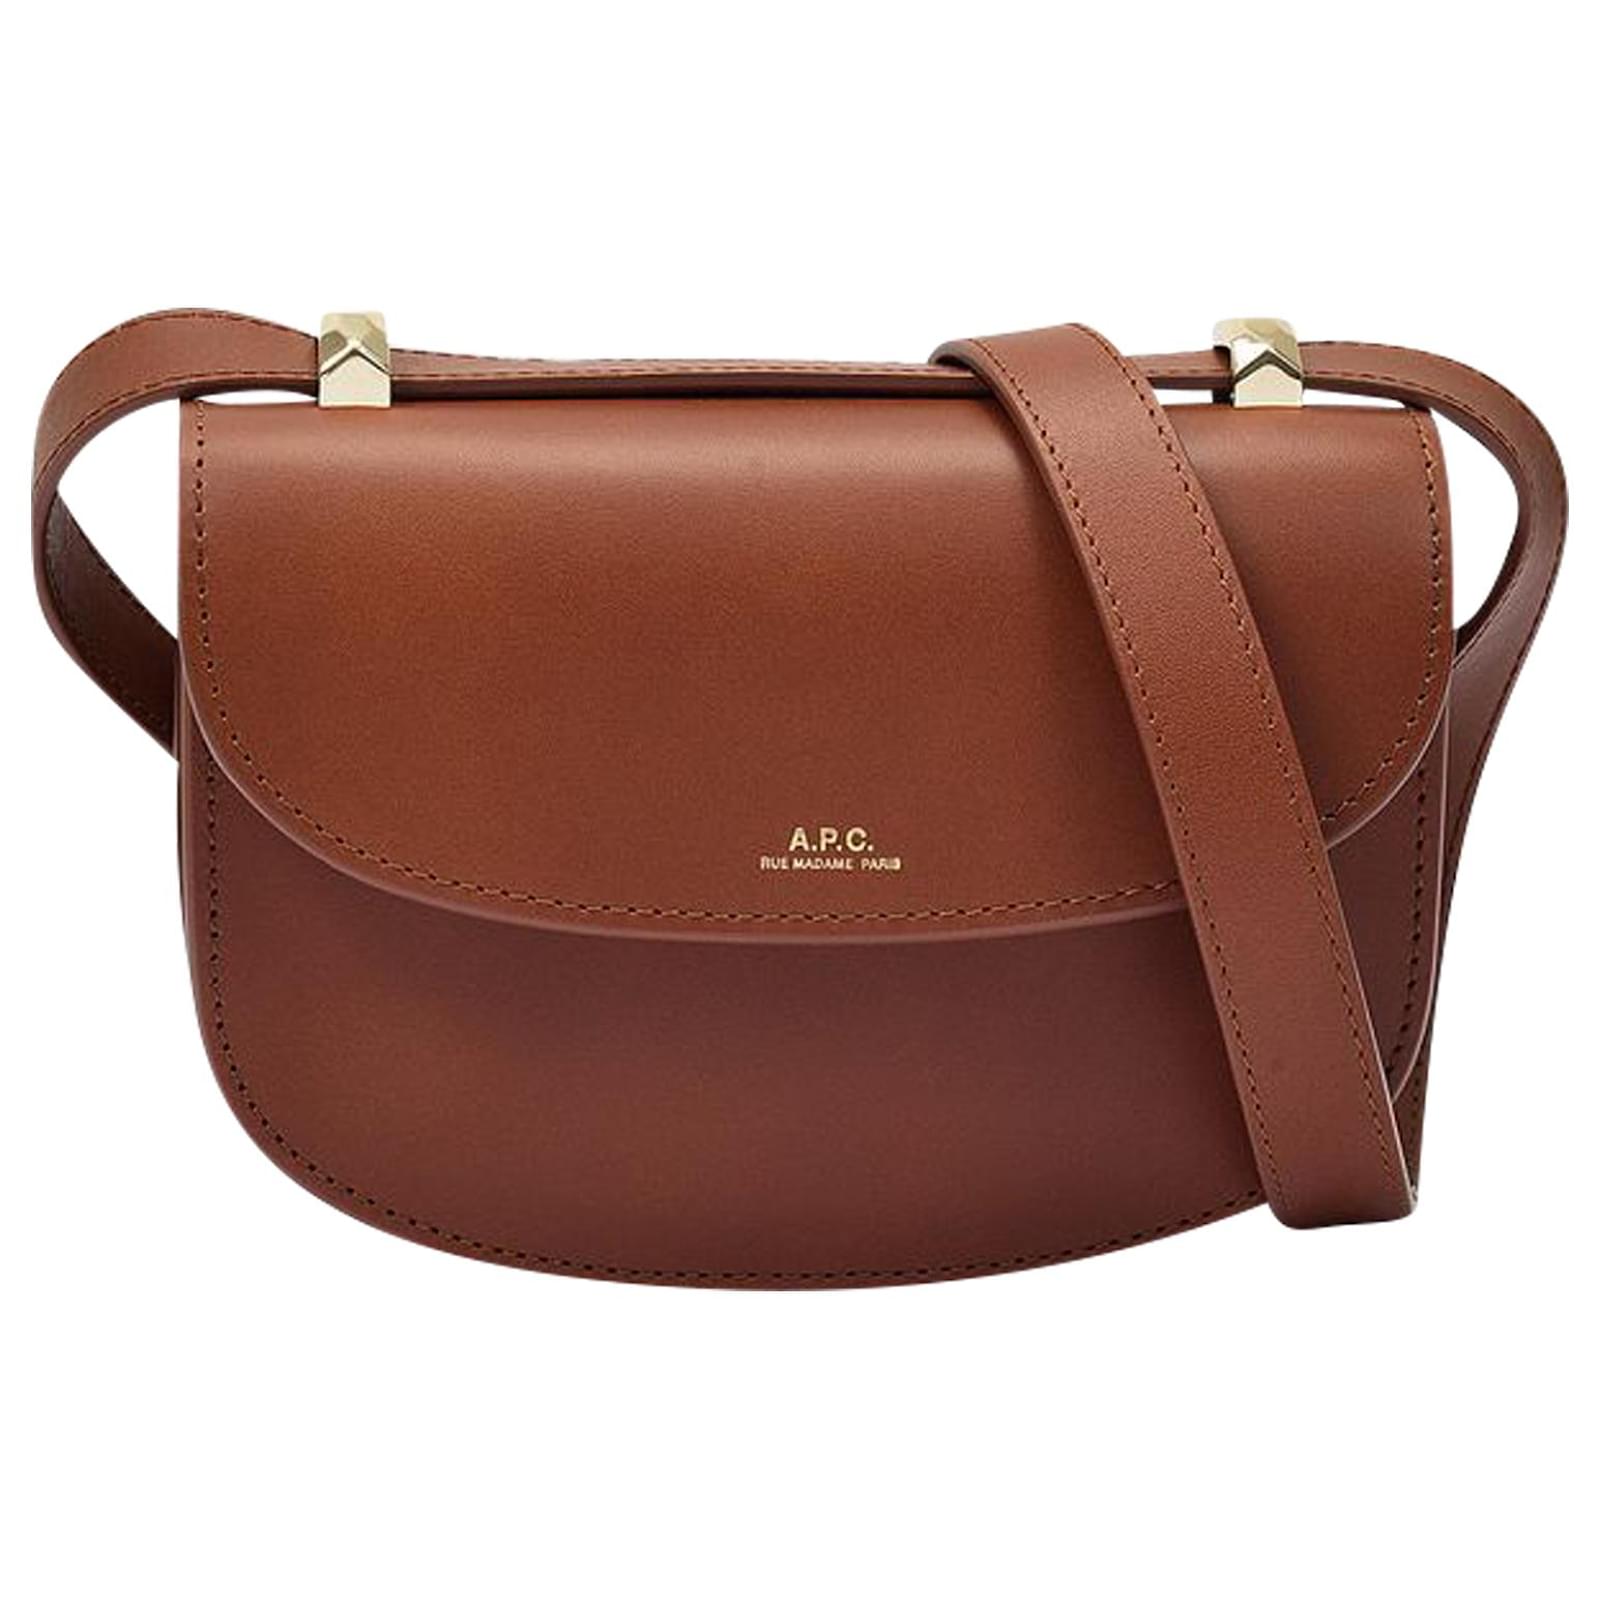 Apc Mini Geneve On Strap Bags in Brown Smooth Leather Pony-style